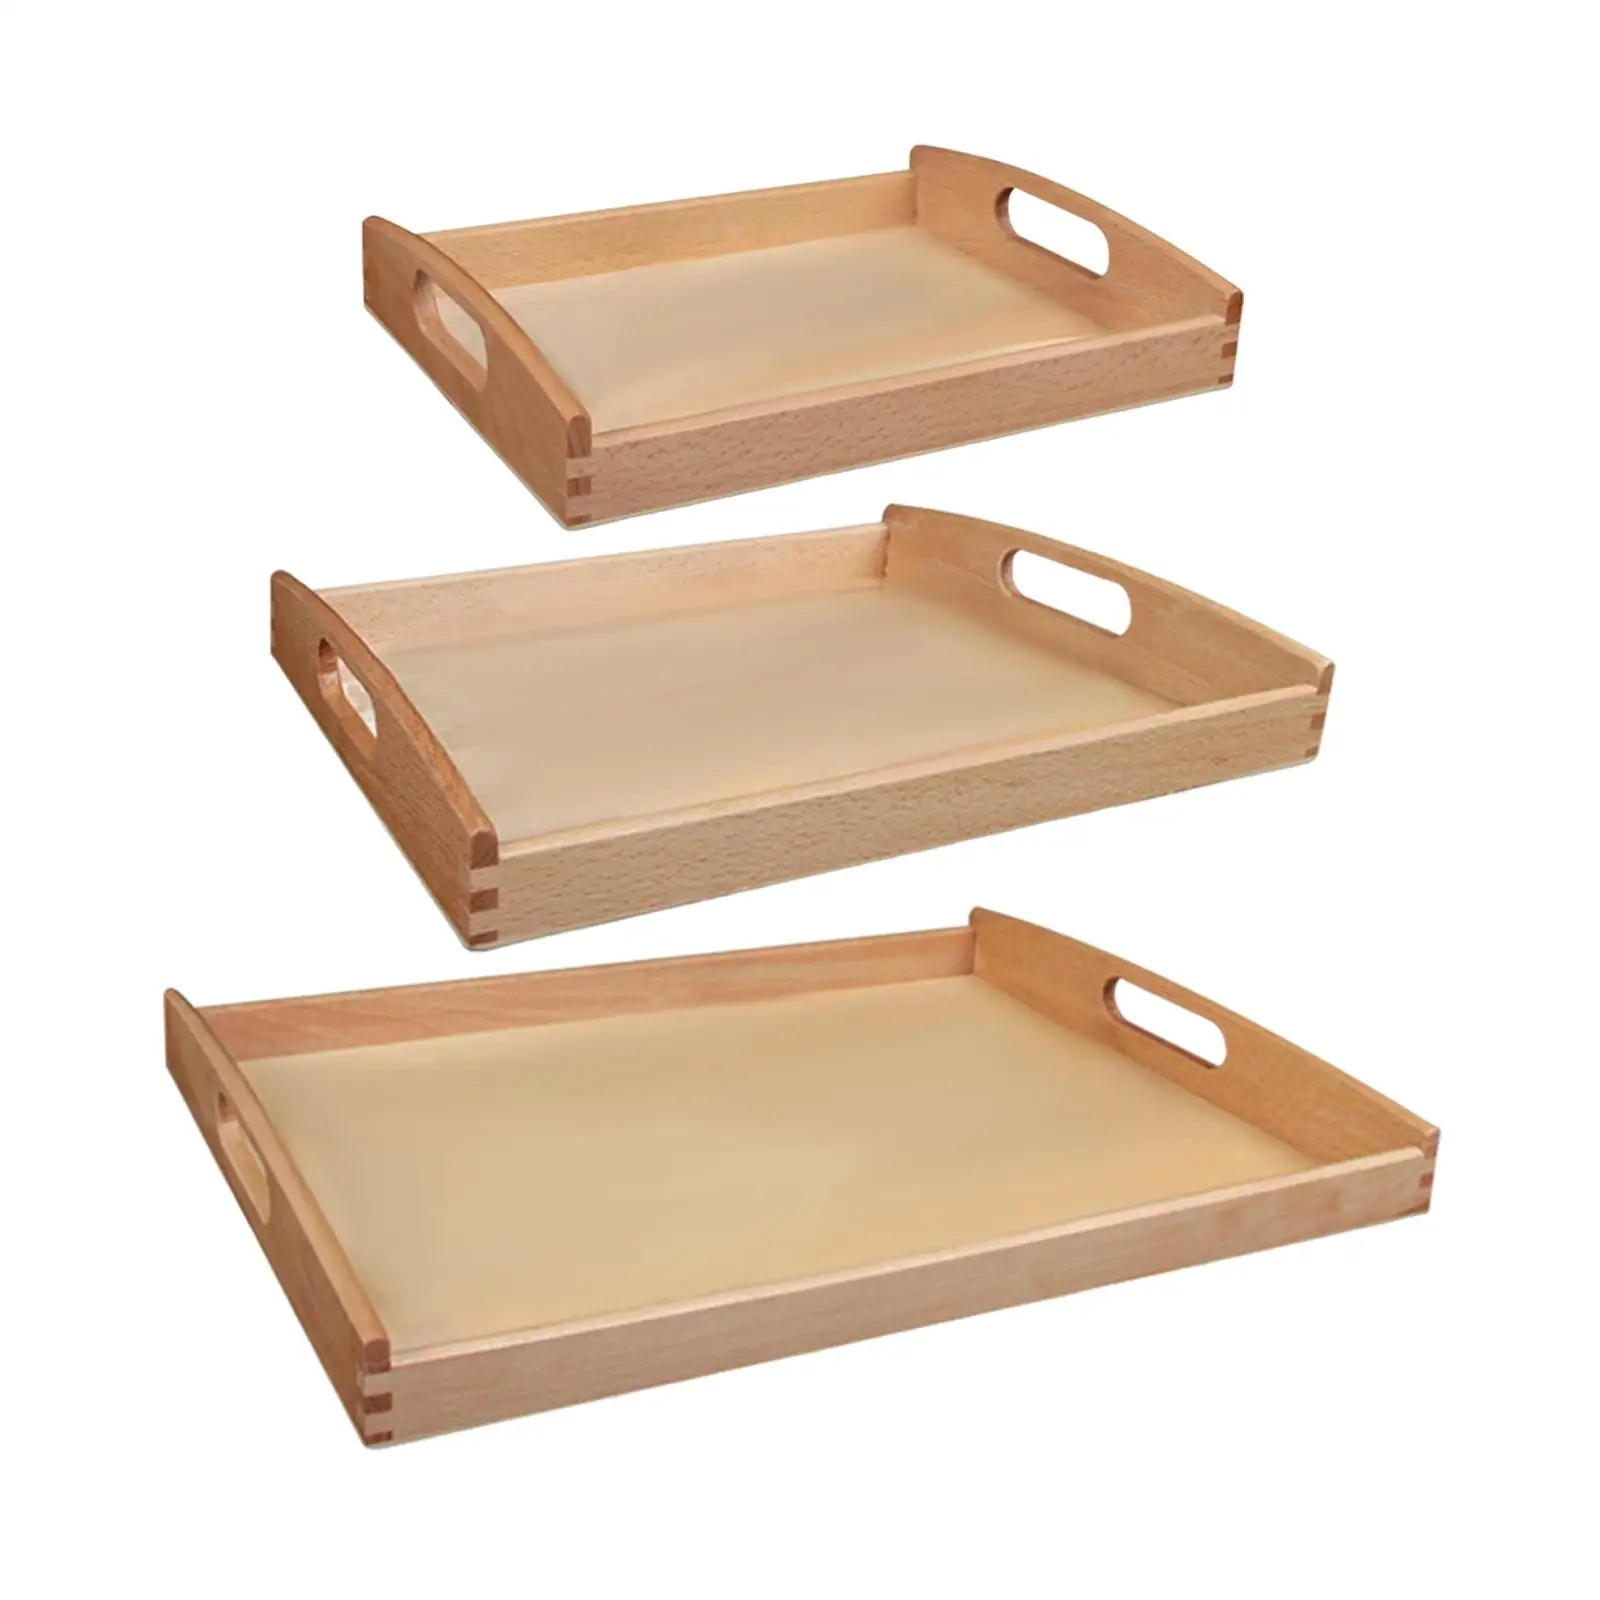 Wooden Serving Trays Education Toys Rectangular Shape Unfinished with Handle for Party Crafts Serving Home Decor